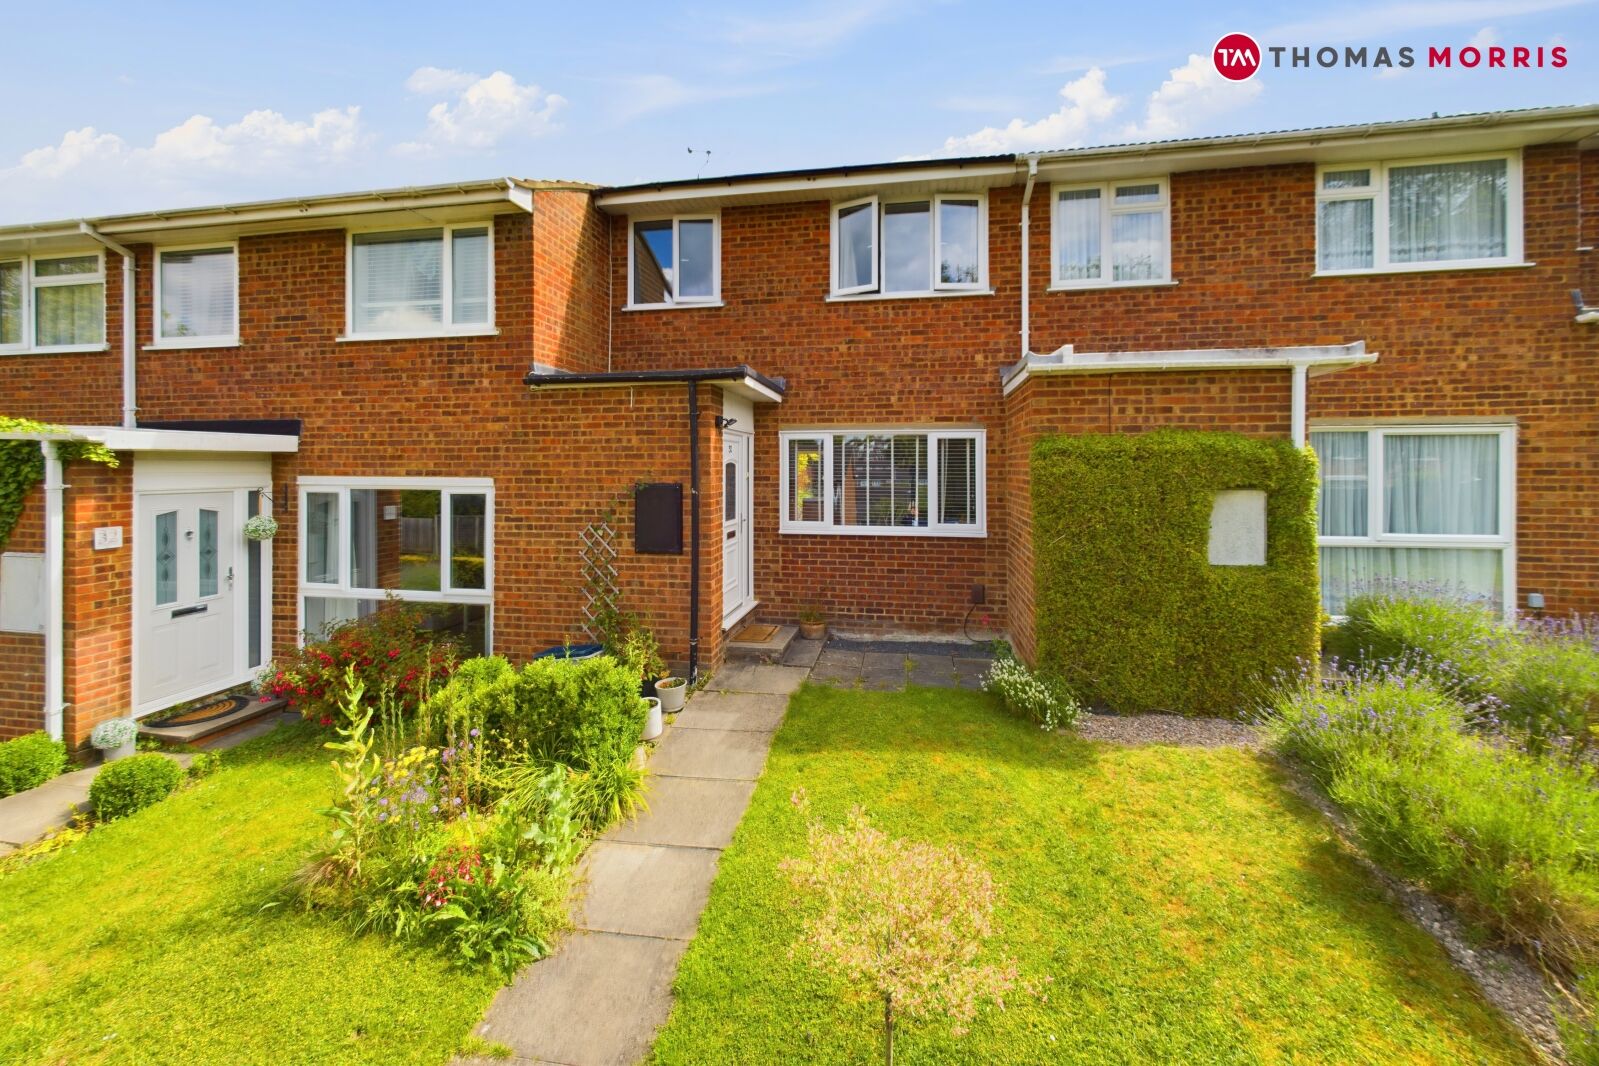 3 bedroom mid terraced house for sale Shaftesbury Way, Royston, SG8, main image